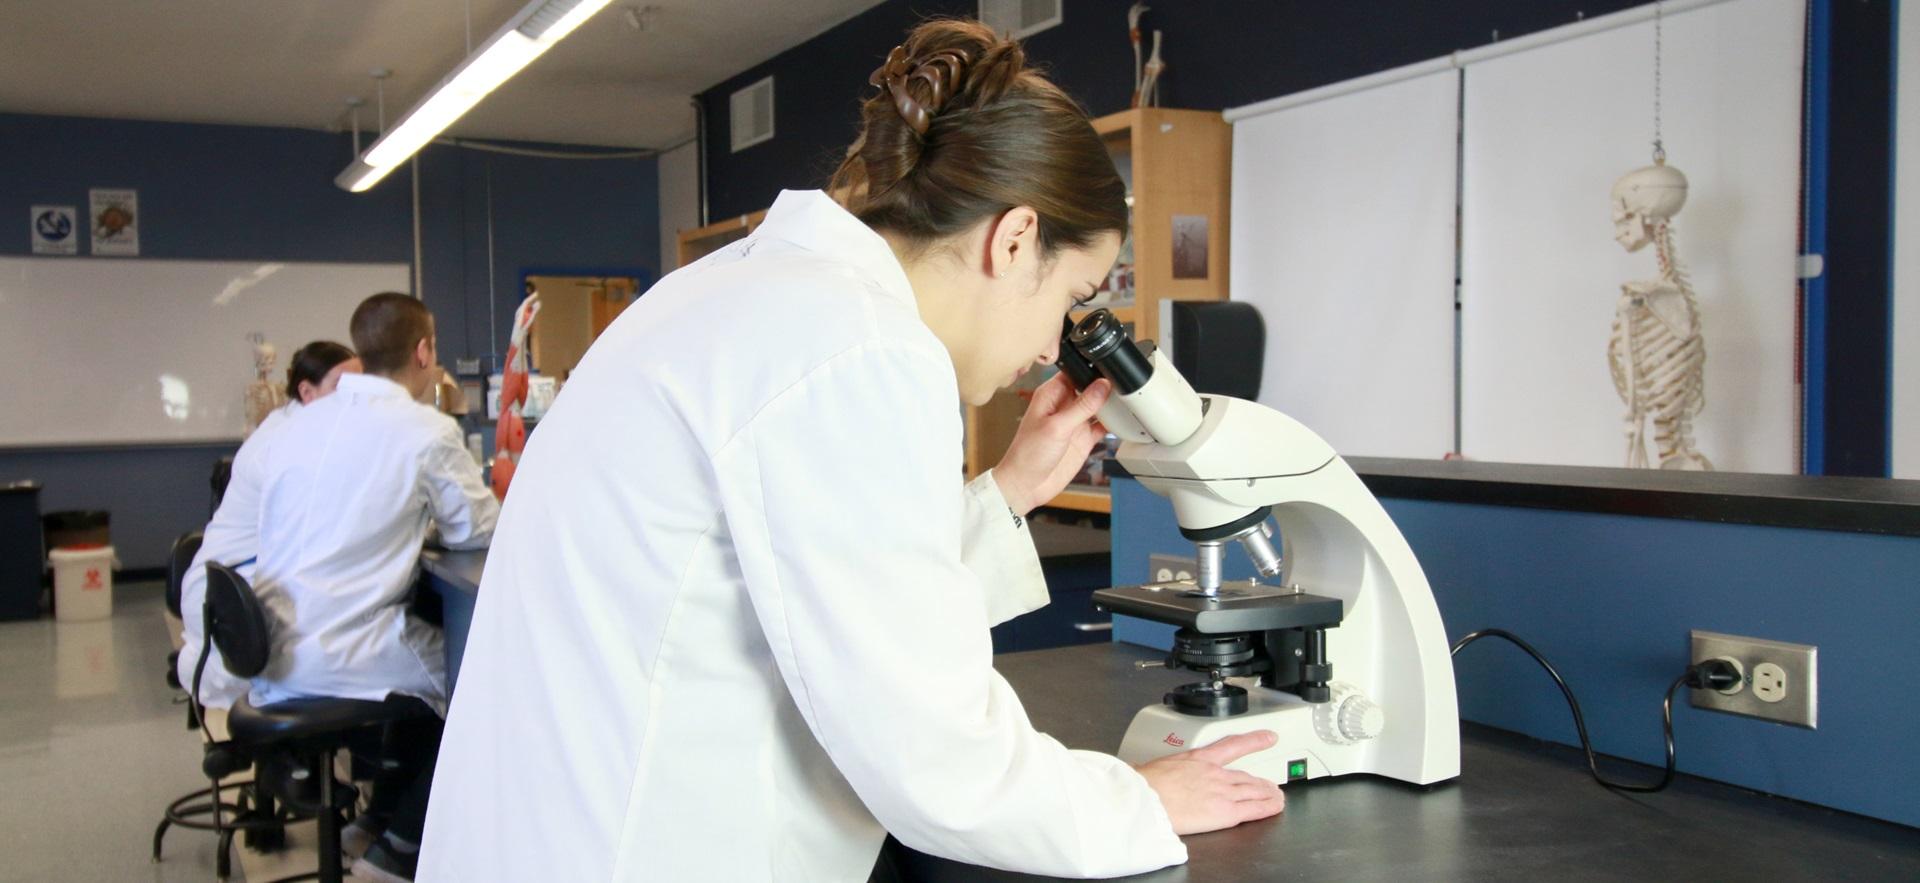 Nursing student in the lab looking through a microscope with students in background